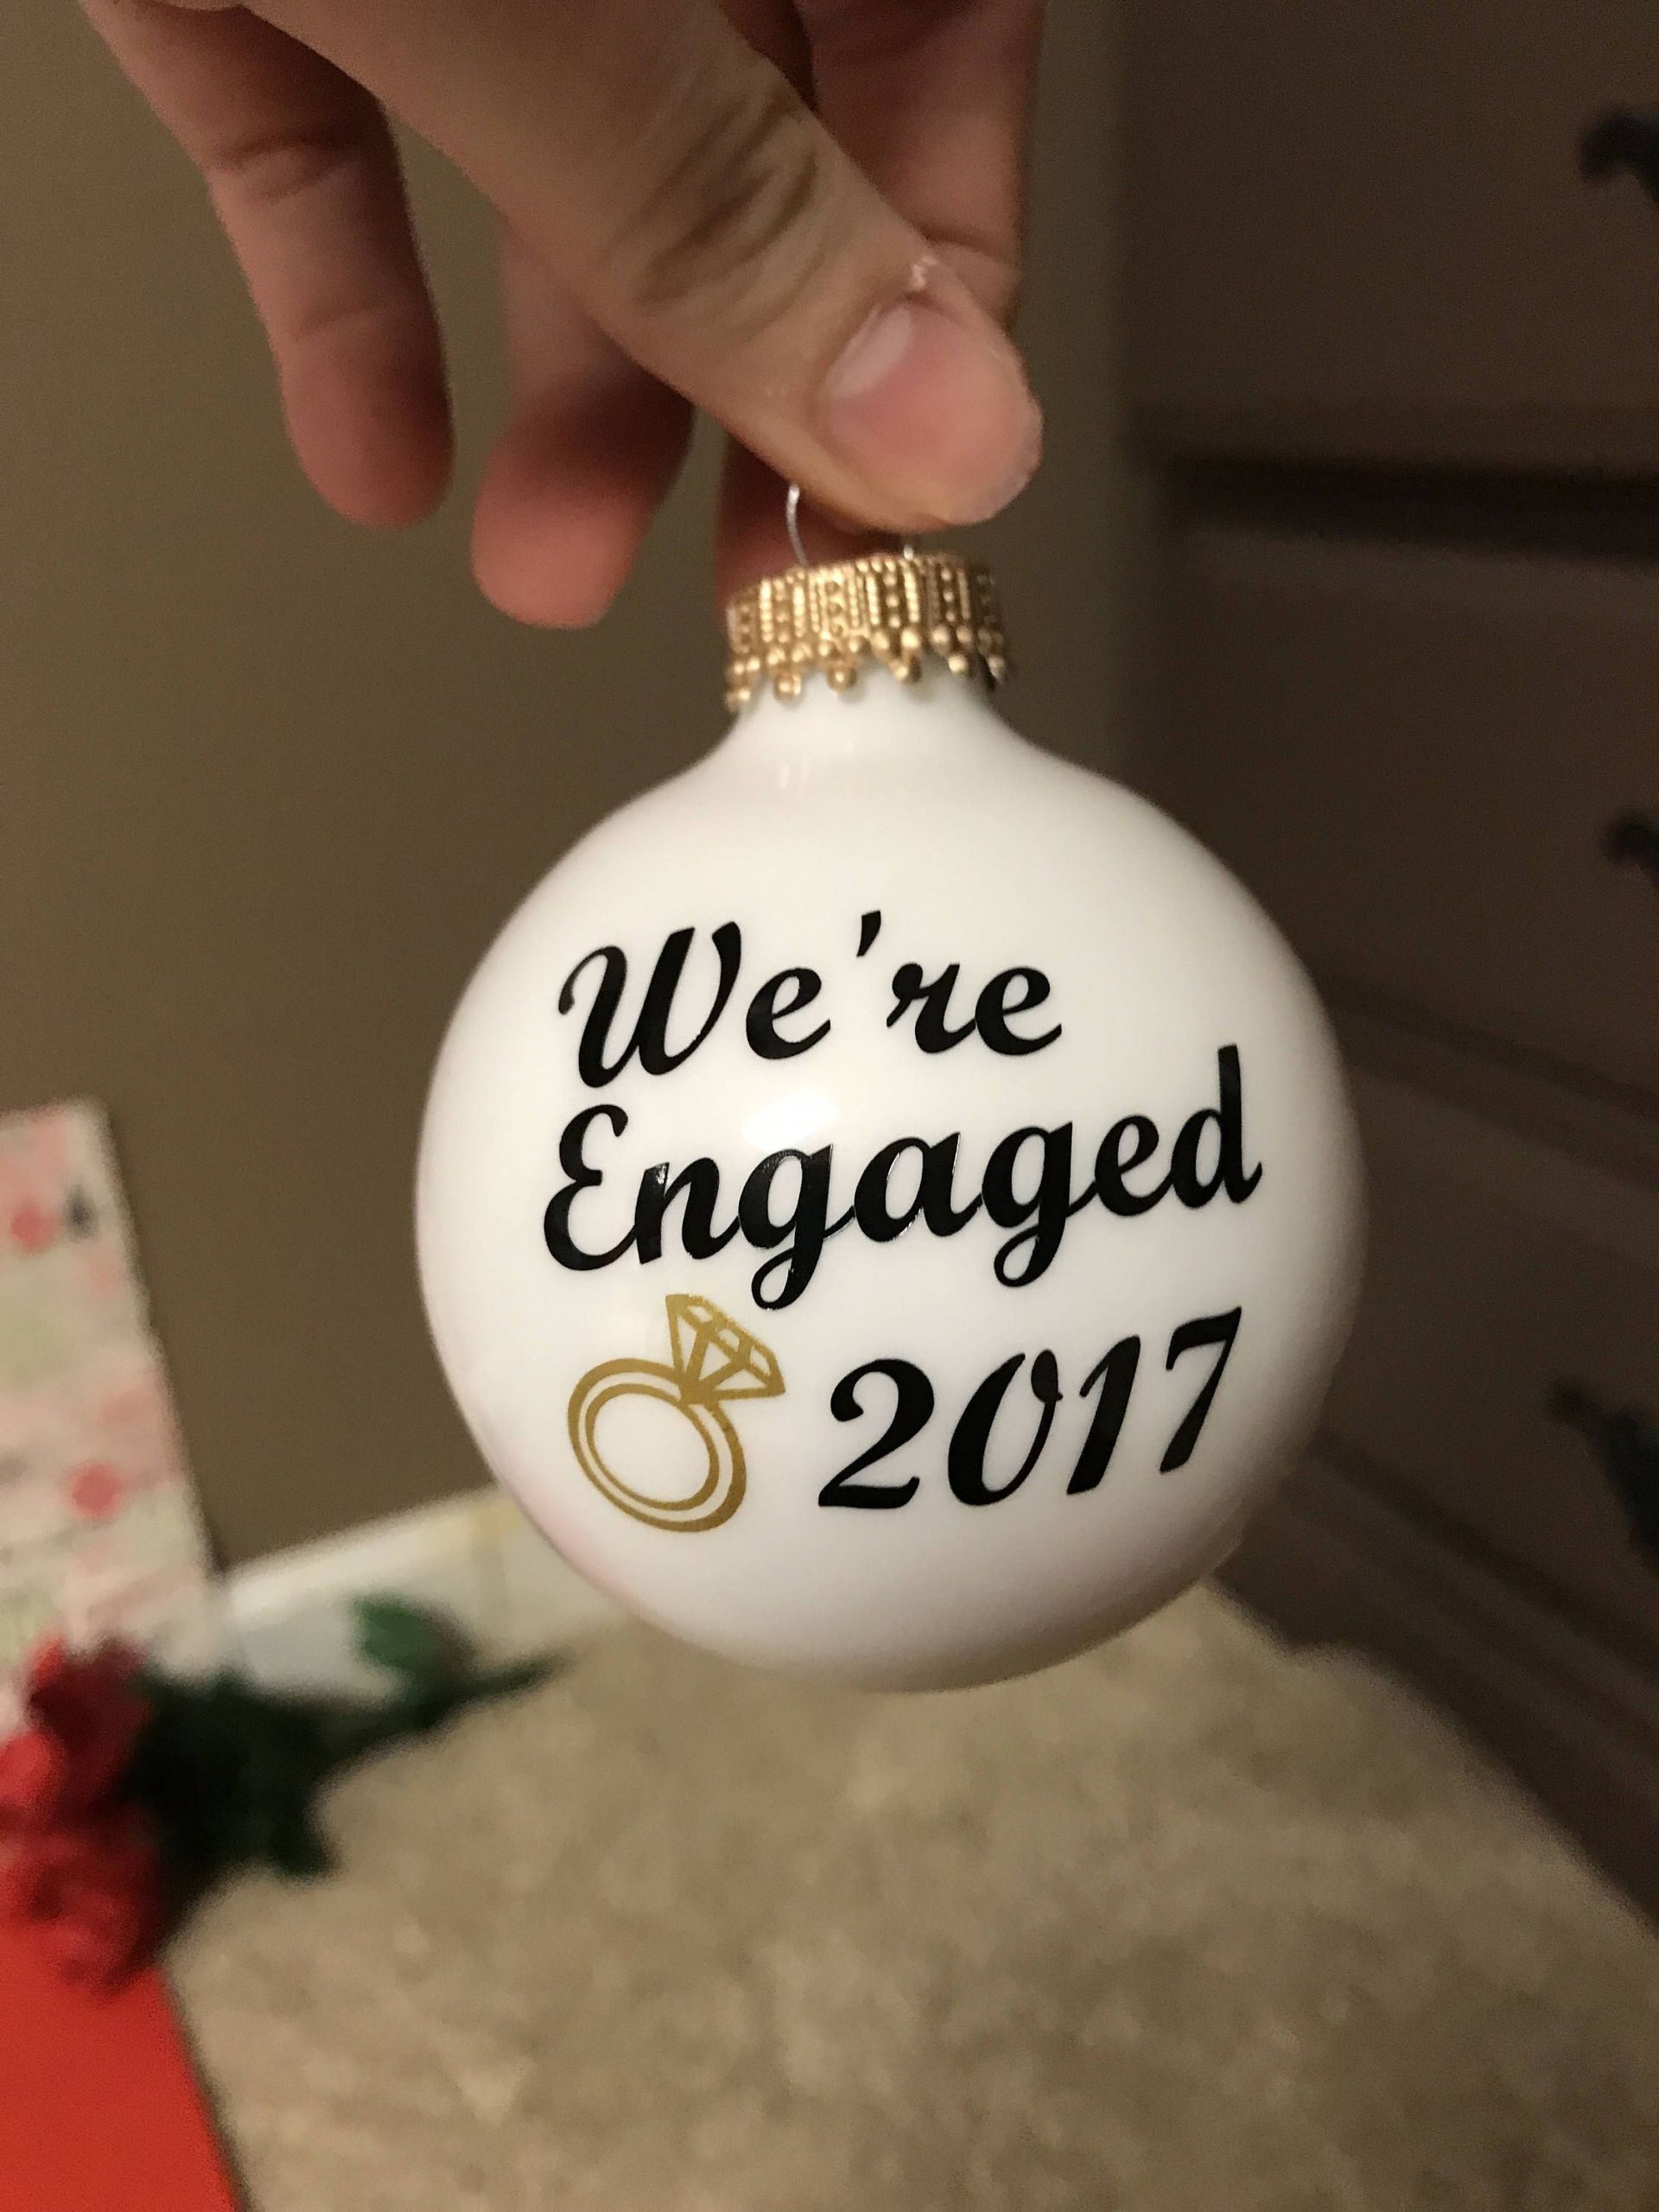 Christmas Gift Ideas For Newly Engaged Couple
 We re engaged Christmas ornaments for any newly engaged